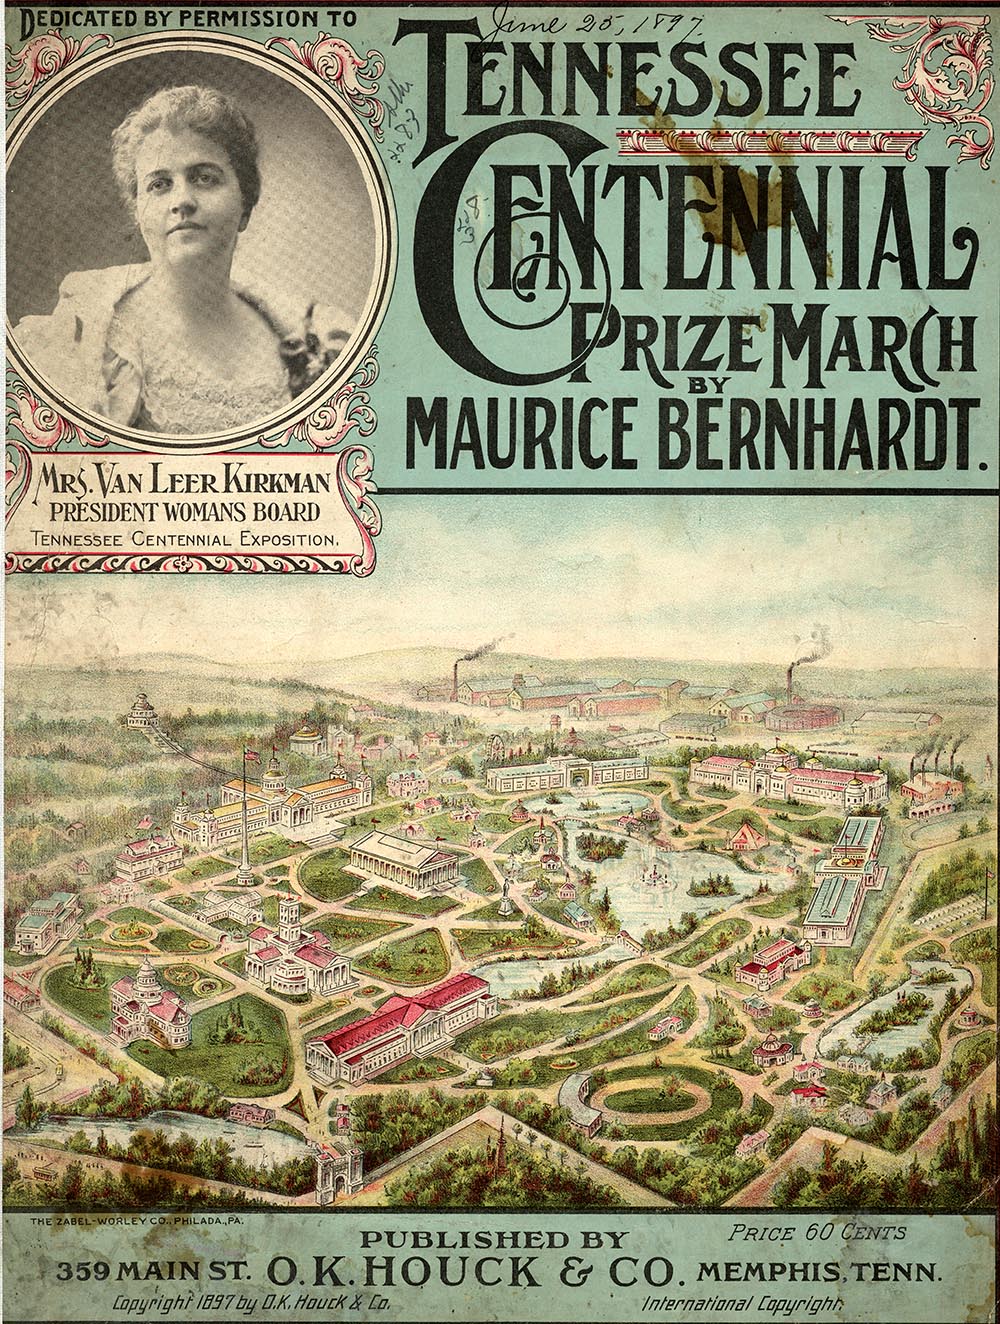 Sheet music featuring an aerial drawing of the Tennessee Centennial Exposition in 1897